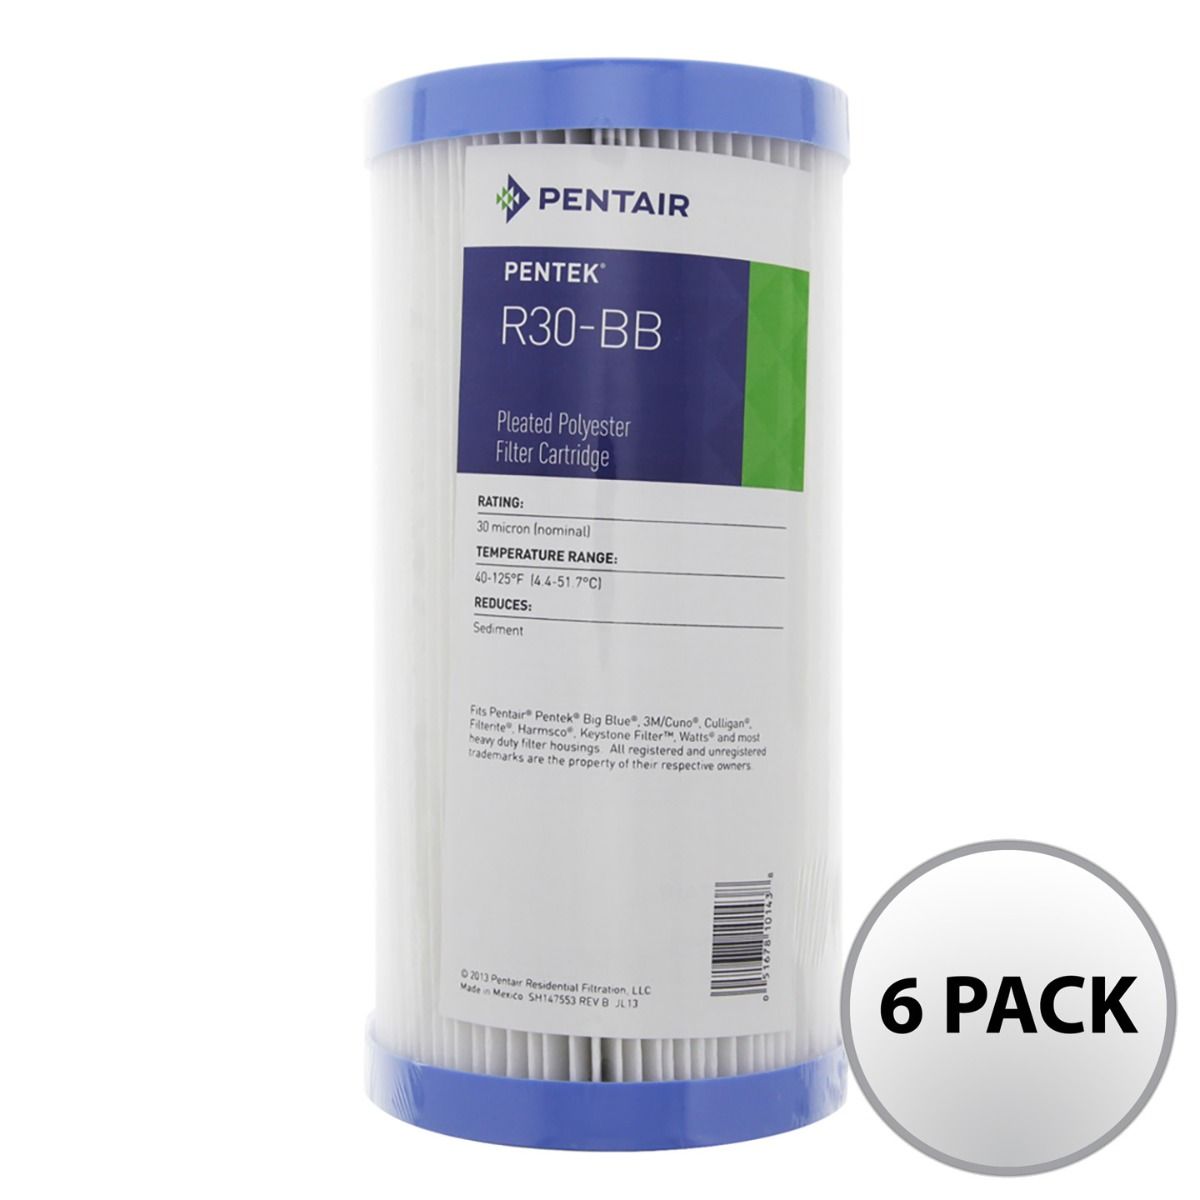 Pentek R30-BB Pleated Polyester Water Filter (9-3/4-inch x 4-1/2-inch)